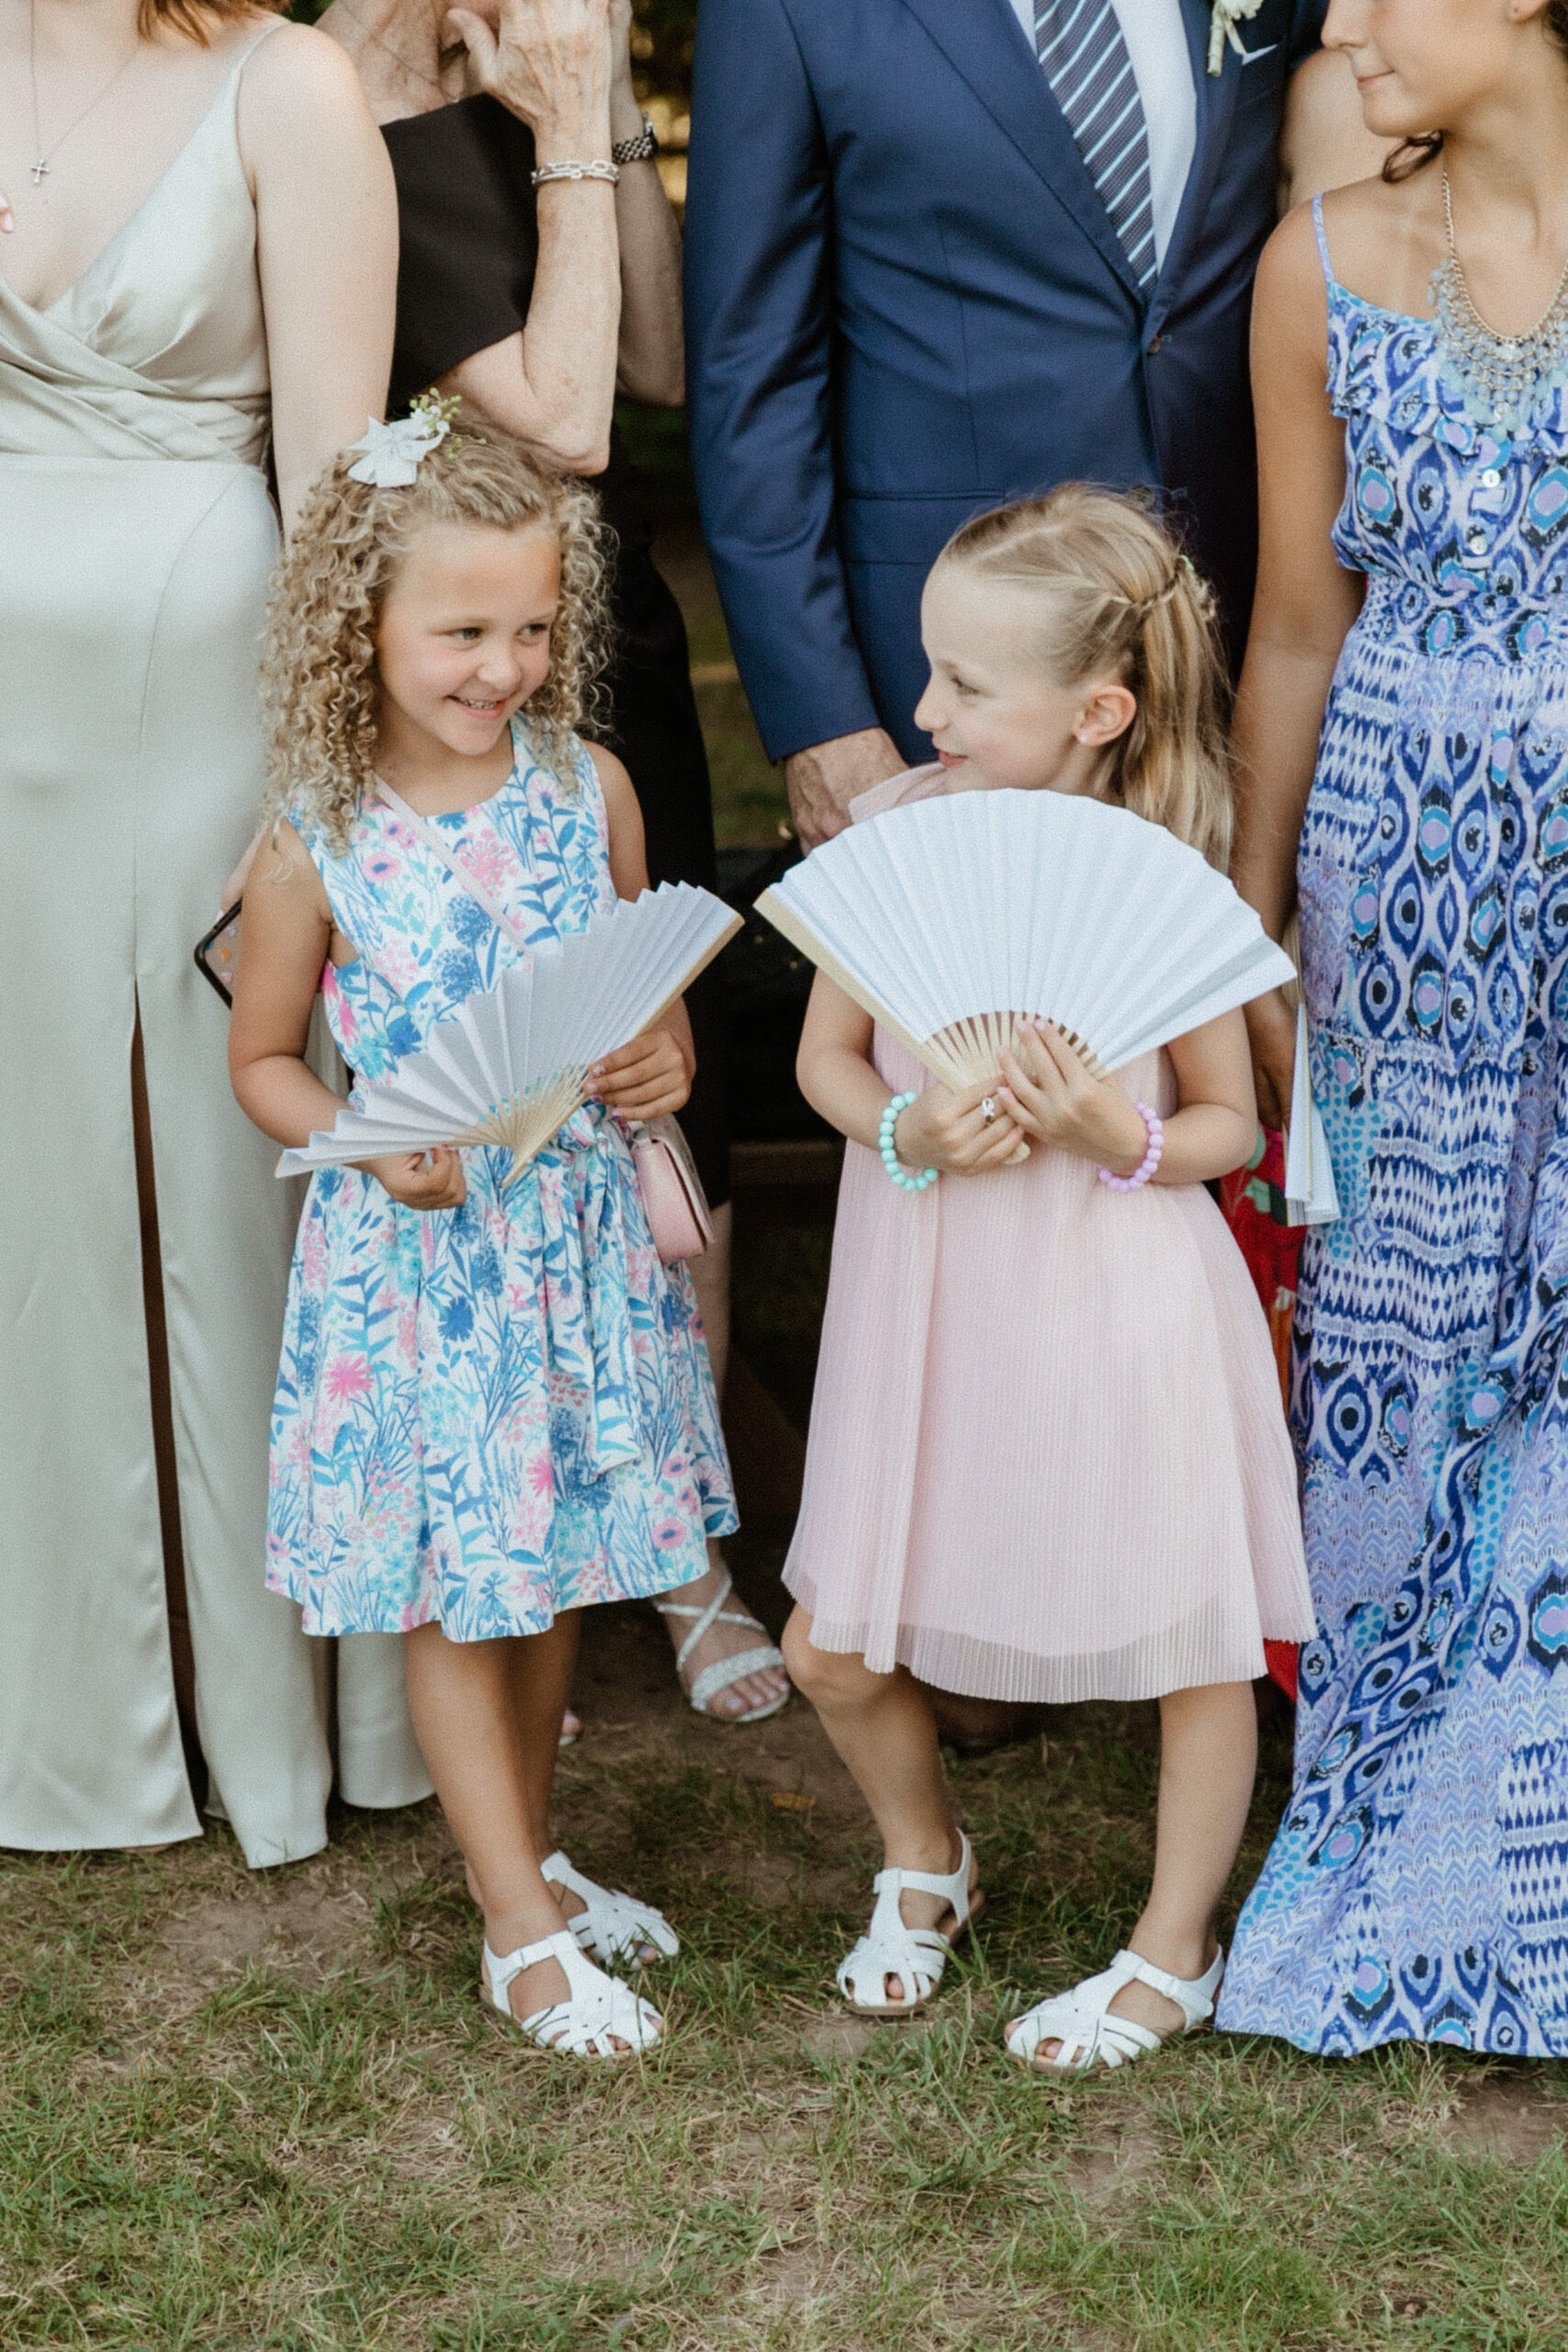 Little girls laugh during the wedding day